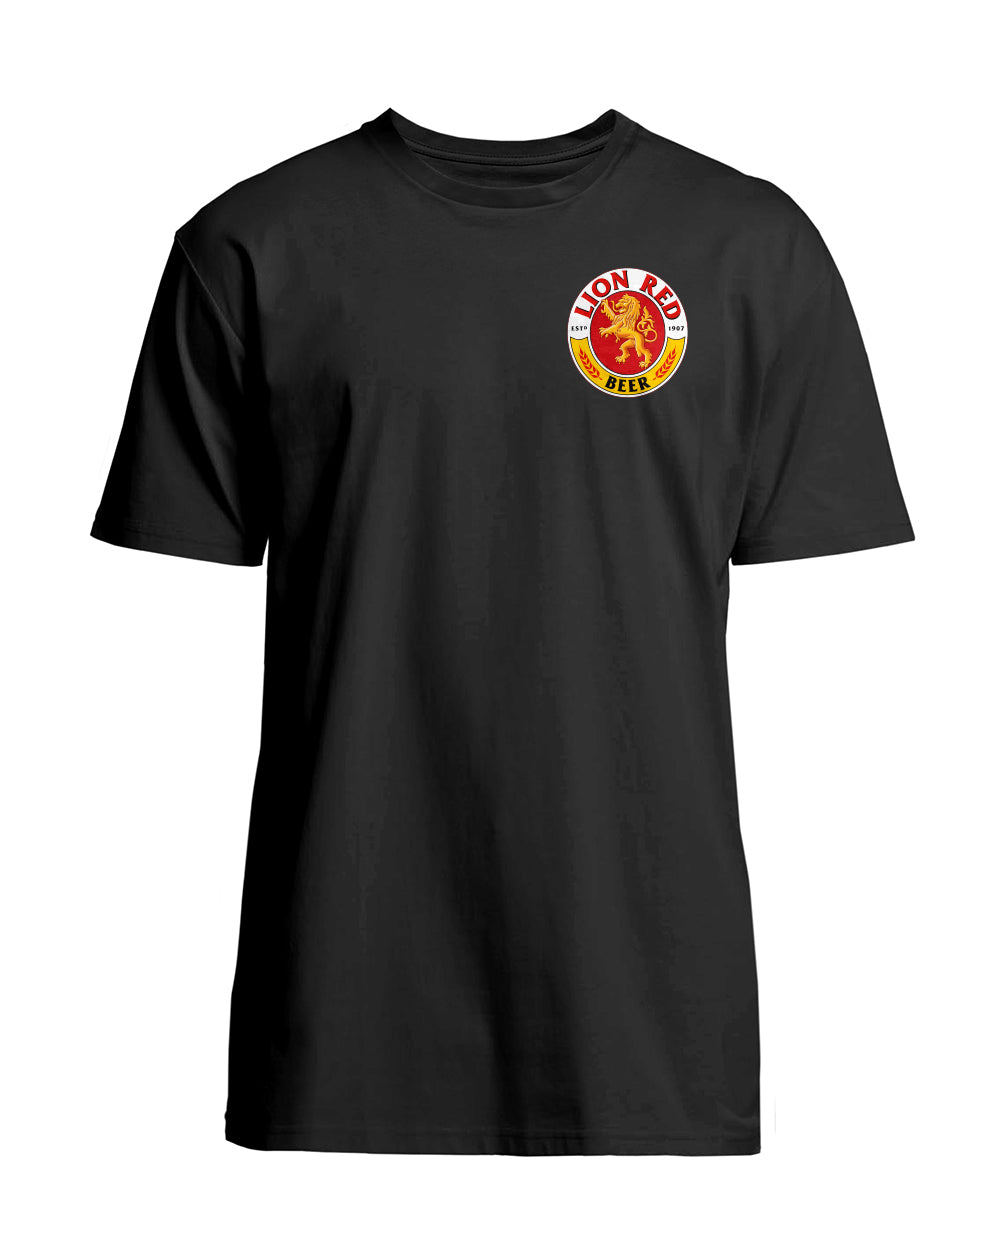 Lion Red Tee Rondel -  Beer Gear Apparel & Merchandise - Speights - Lion Red - VB - Tokyo Dy merch